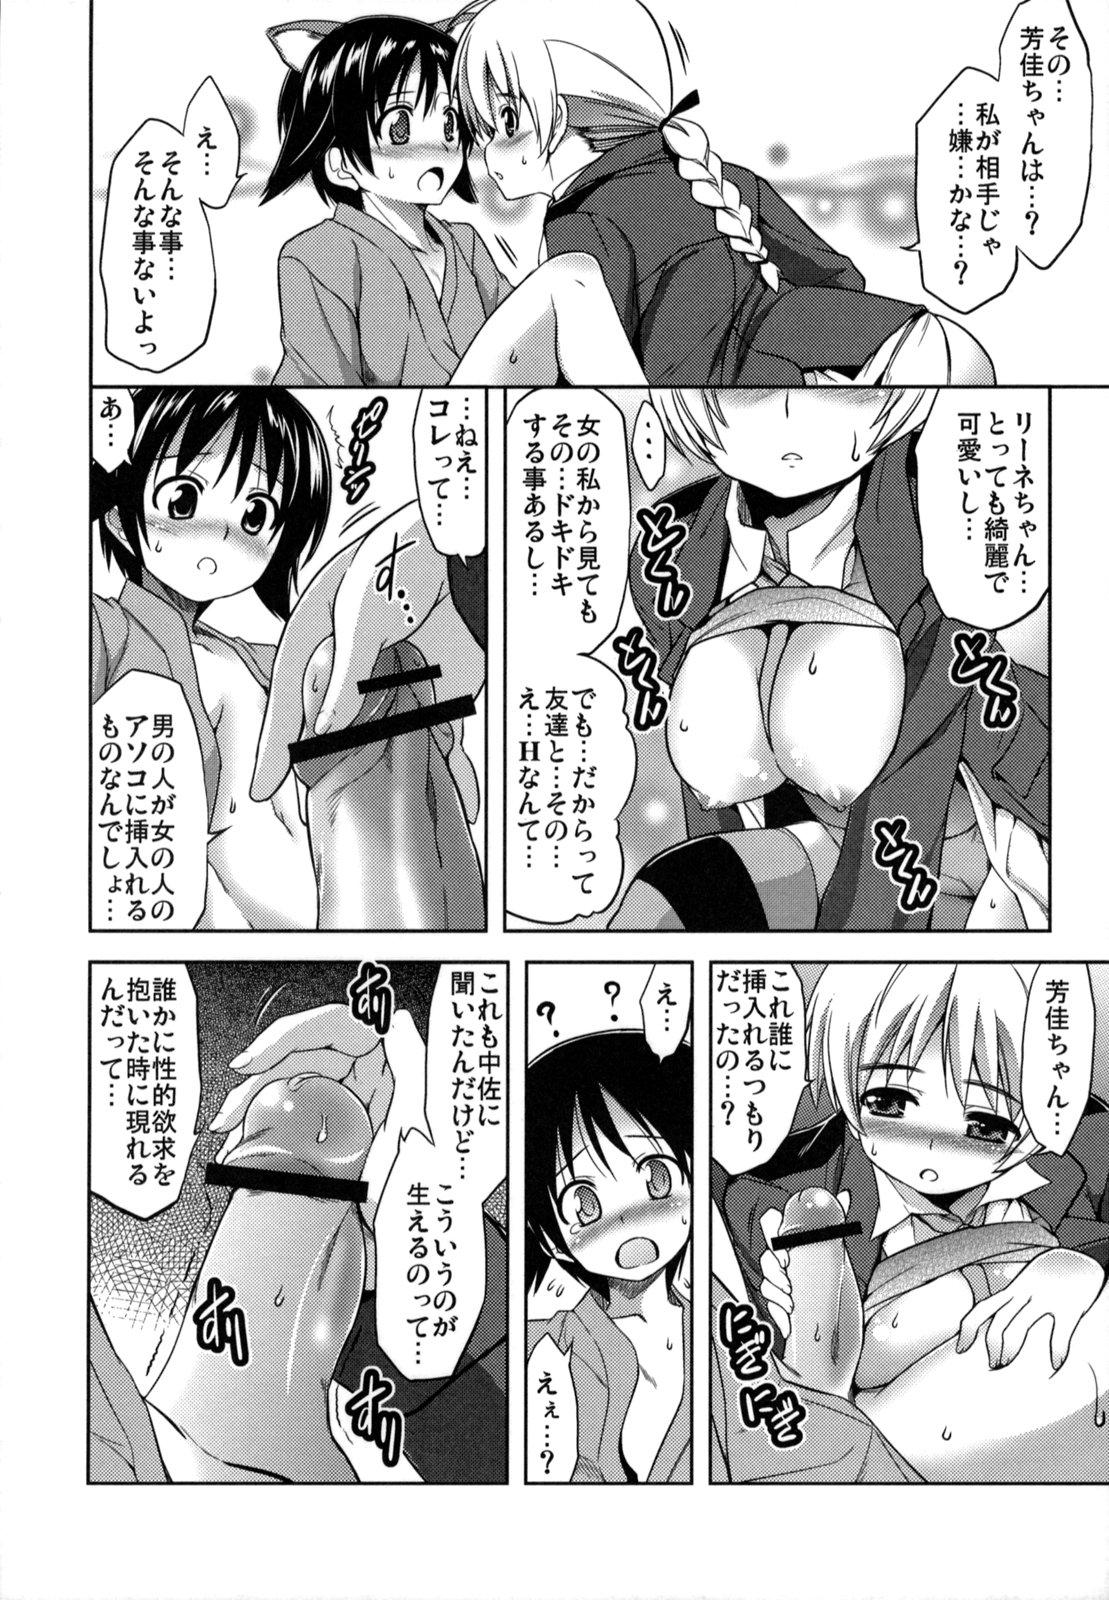 Deepthroat GL WITCHES - Strike witches Gorgeous - Page 5